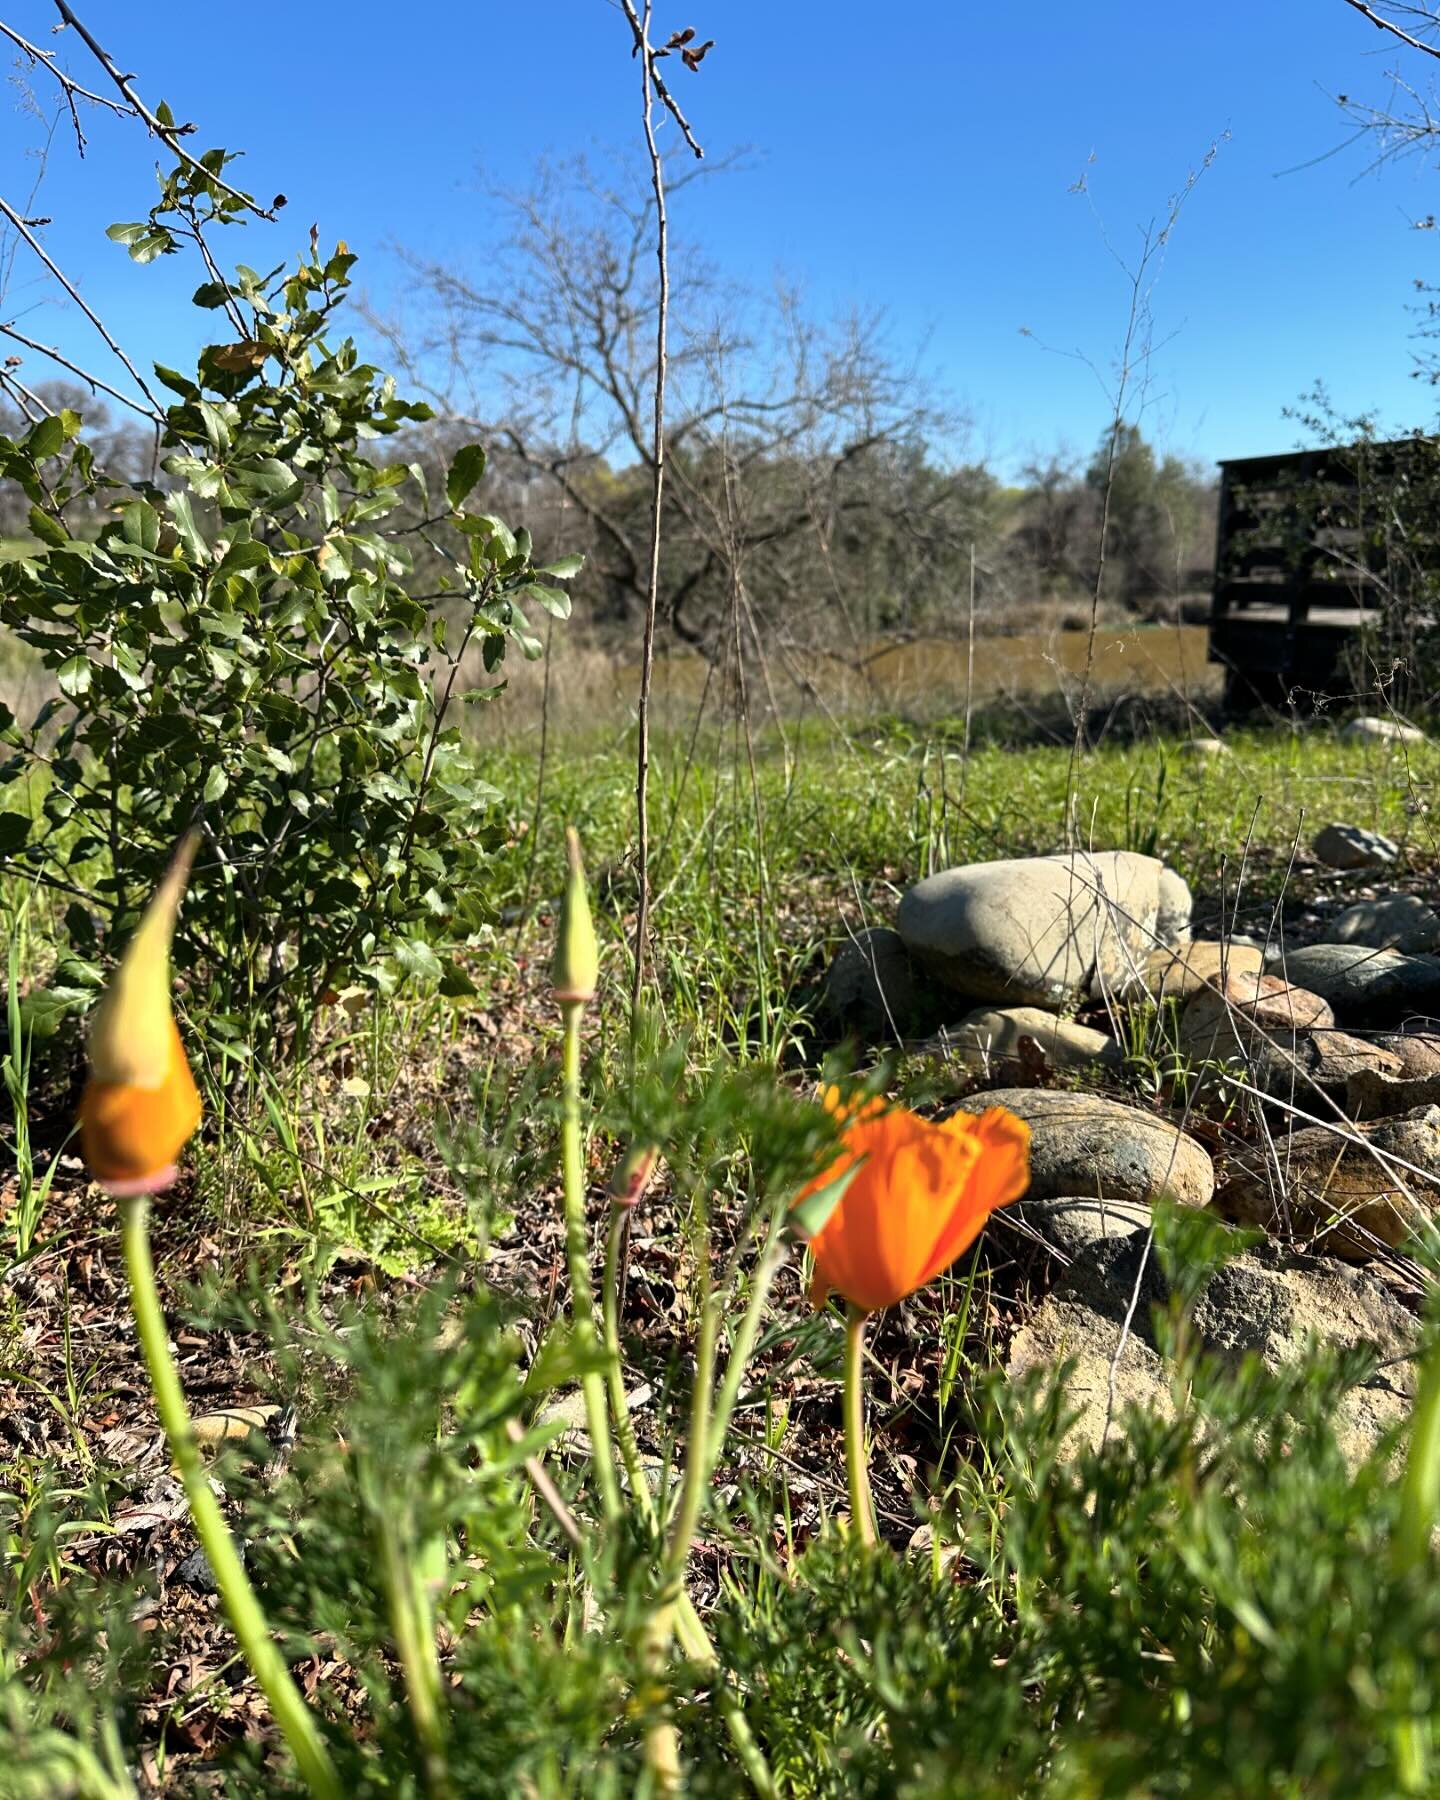 We all get to bloom again!

In 2020, I sought inspiration, hope, and a sign. I began walking the trails nearly every day, where clusters of poppies caught my attention. One day vibrant in color, the next battered by rain, yet they always returned wit